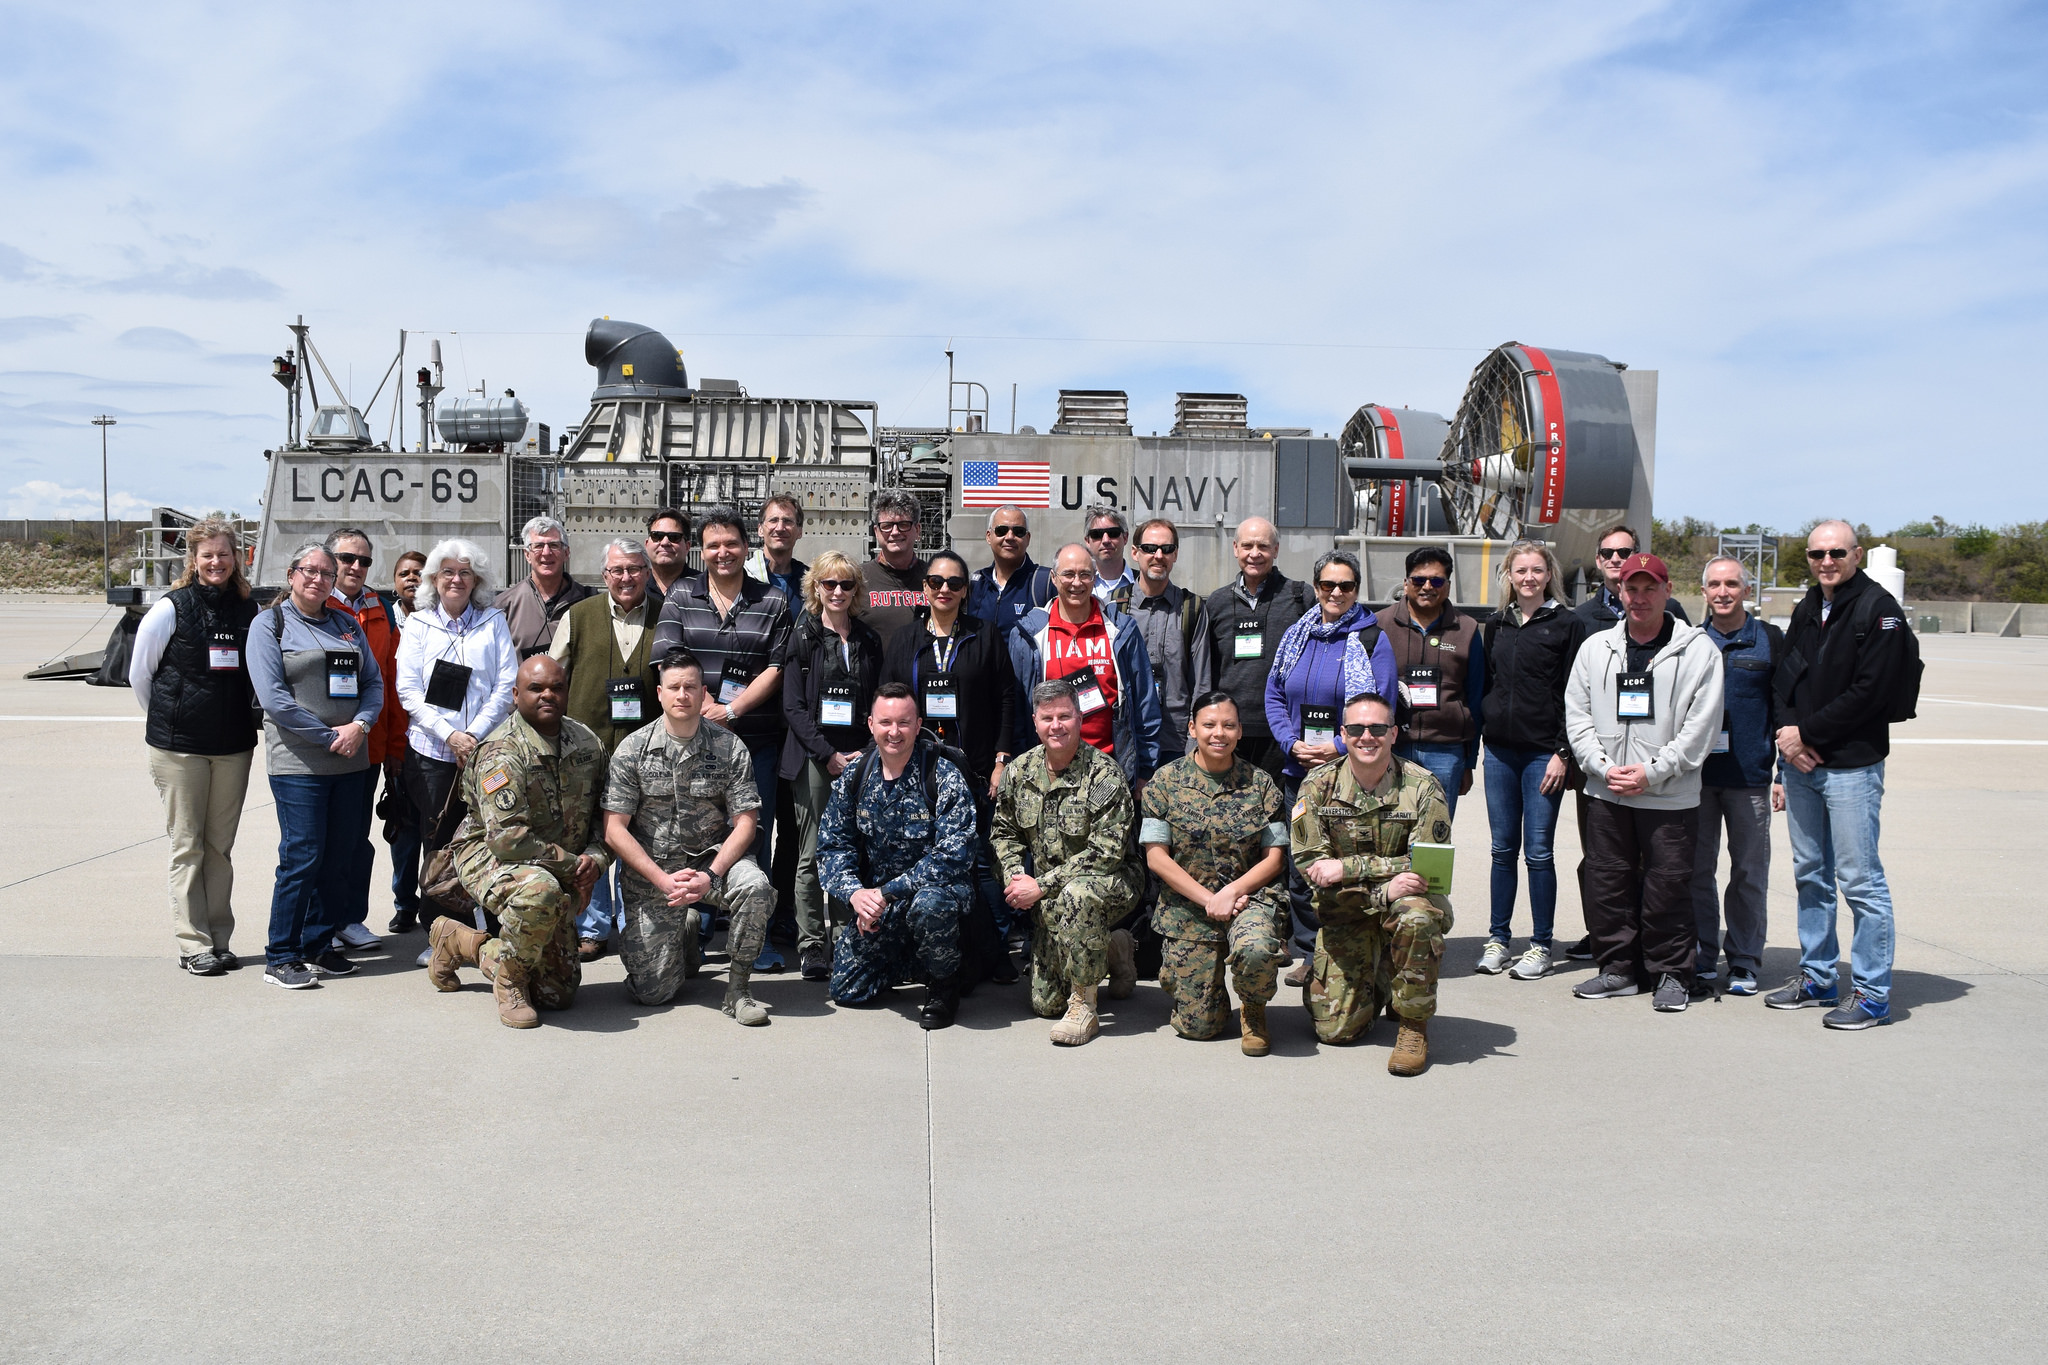 Vice Provost of Academic Operations Mark Todd (far right) and his JCOC cohort in front of a Landing Craft Air Cushion (LCAC) vehicle at the Joint Expeditionary Base Little Creek-Fort Story